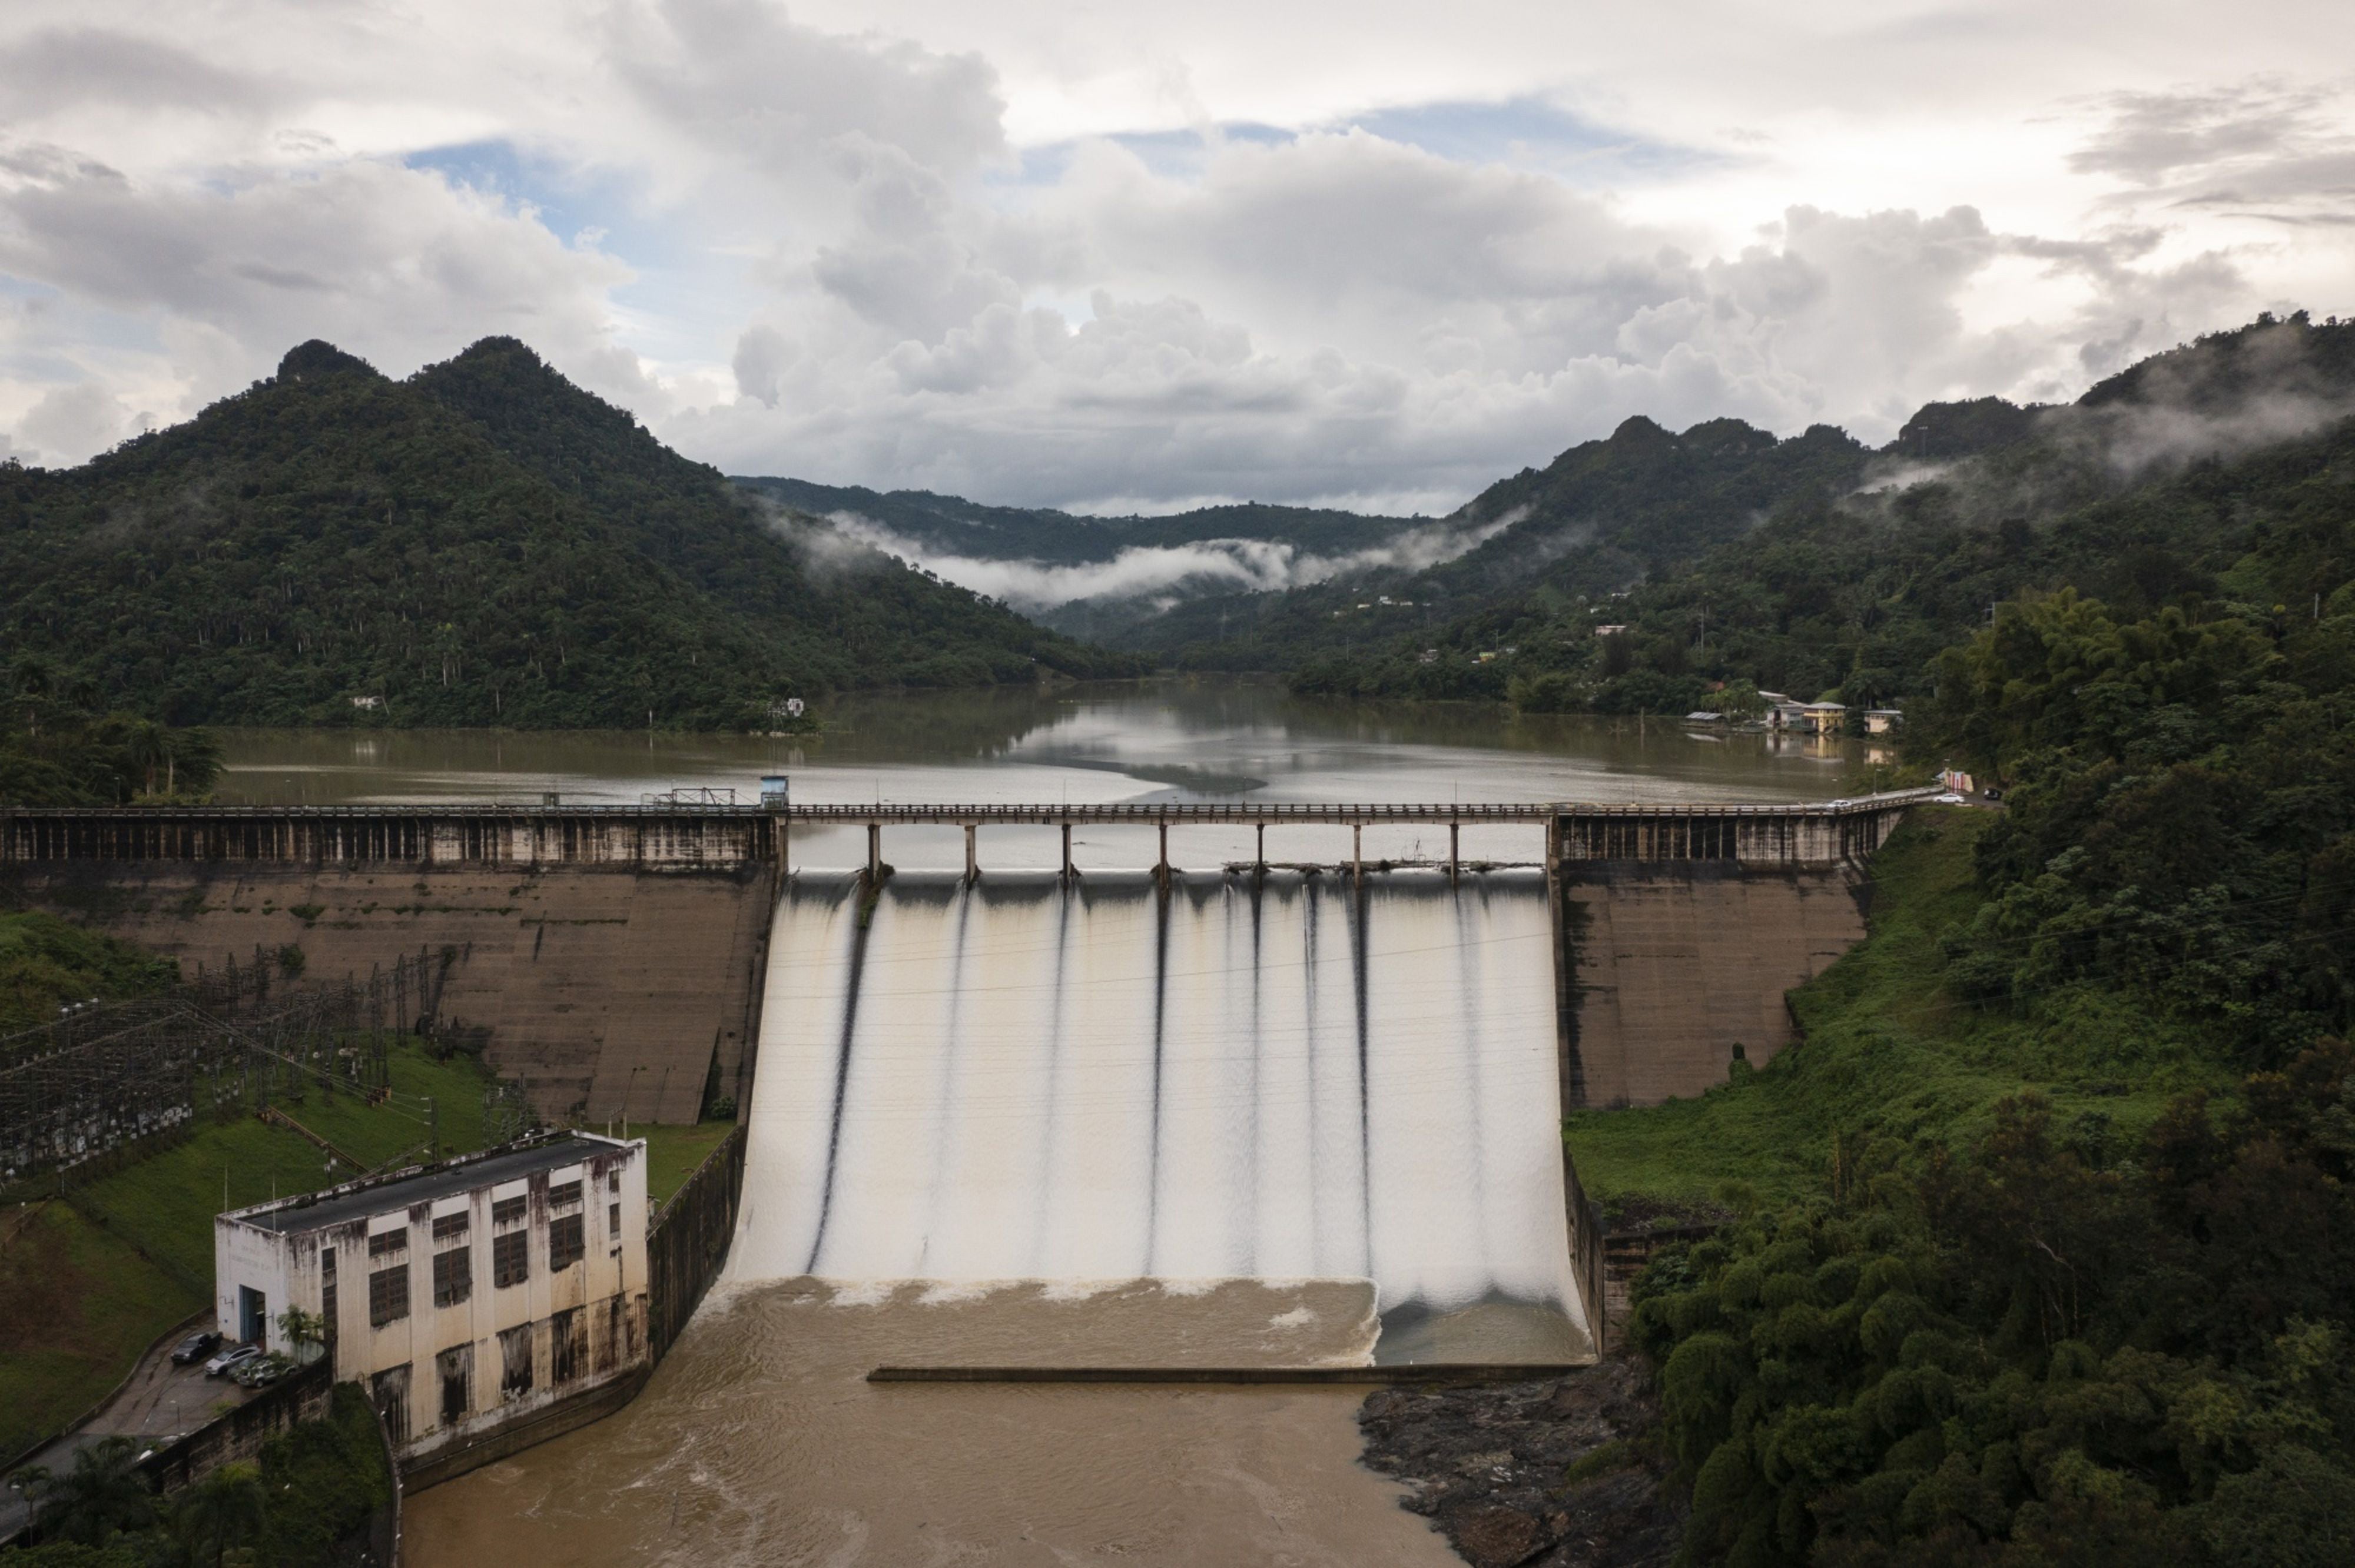 The co-op that runs Castañer's microgrid aspires to take over management of the Dos Bocas hydroelectric dam